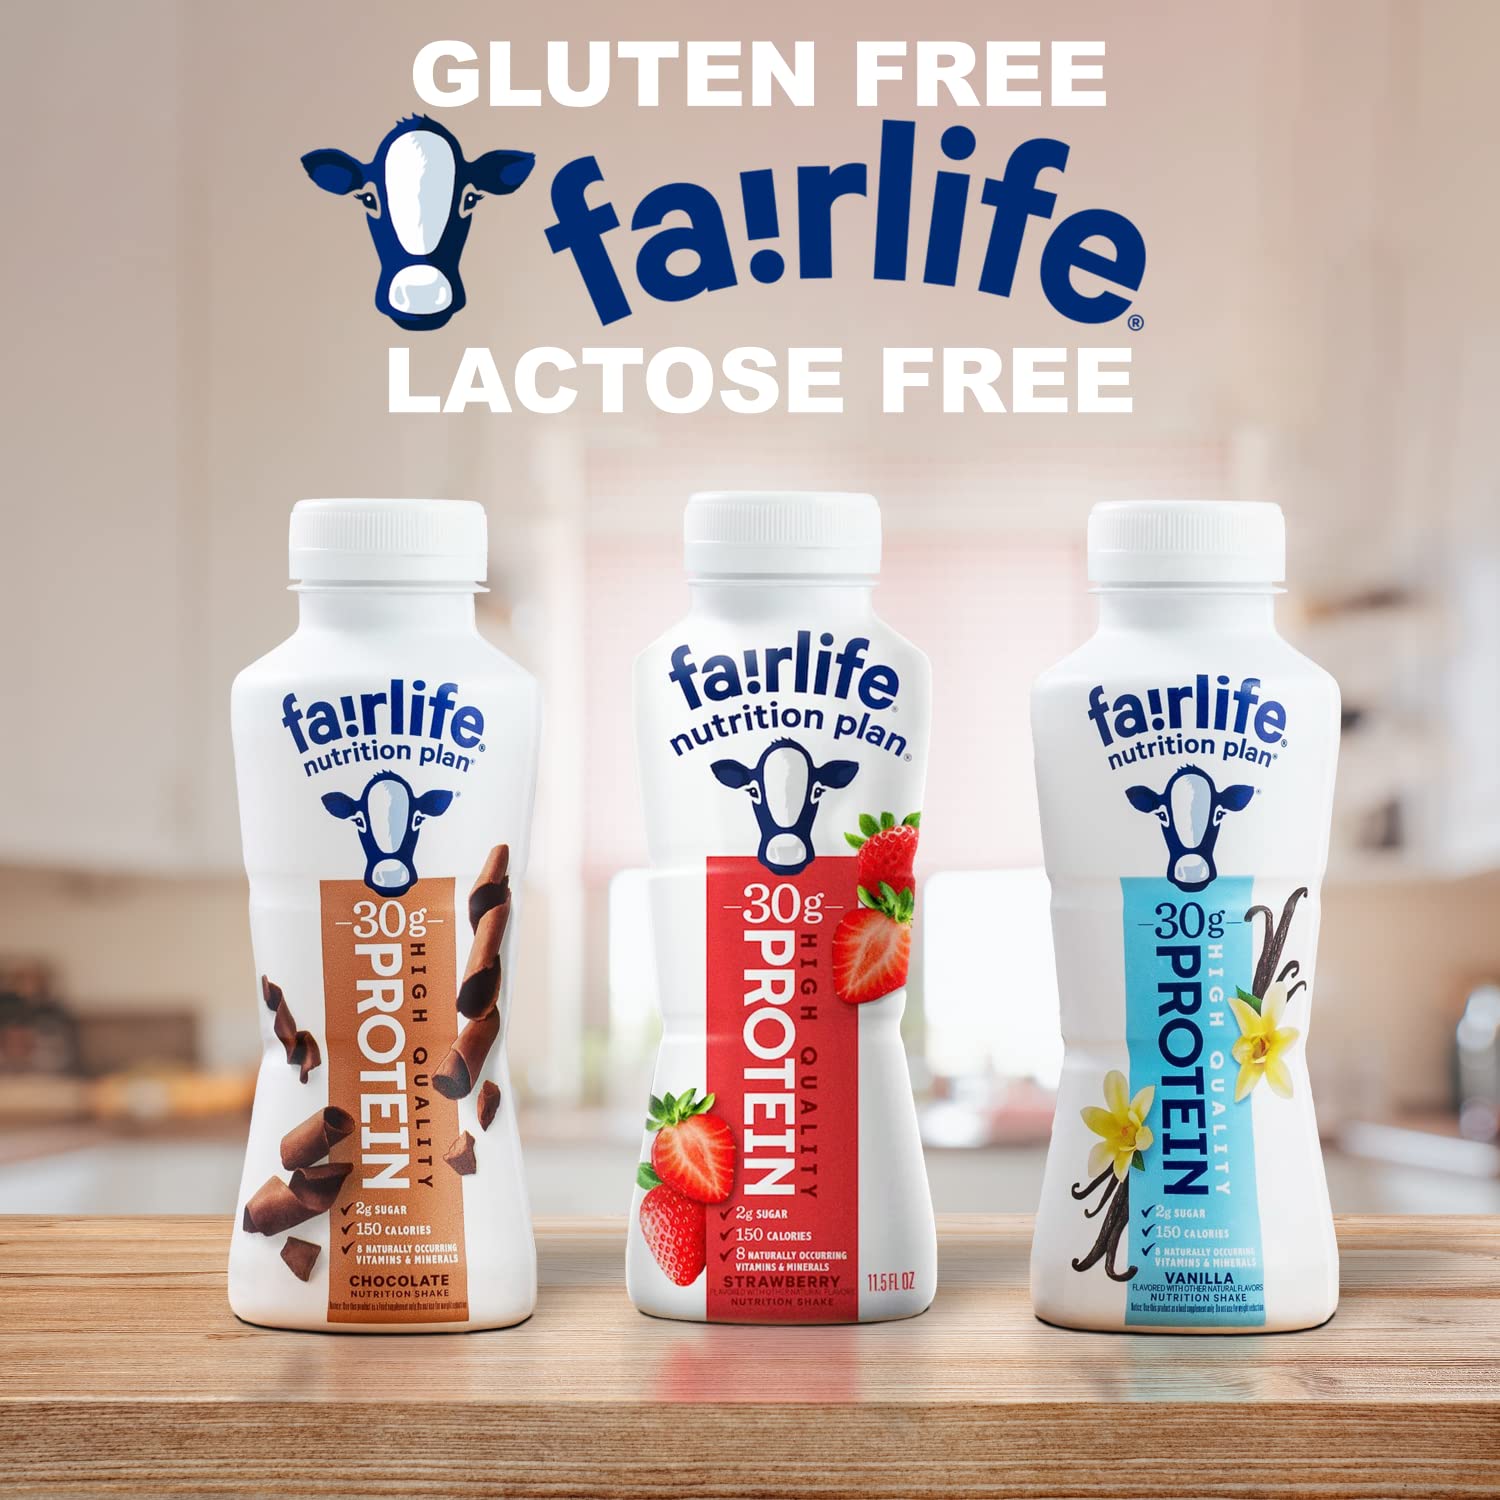 Wholesale prices with free shipping all over United States Fairlife Nutrition Protein Shakes - Pack of 12 | 30g Protein, Low Sugar, Lactose-Free | Delicious Vanilla, Chocolate, Salted Caramel, and Strawberry Flavors 11.5 fl., oz. (In KozyHome Packaging) (Chocolate) - Steven Deals